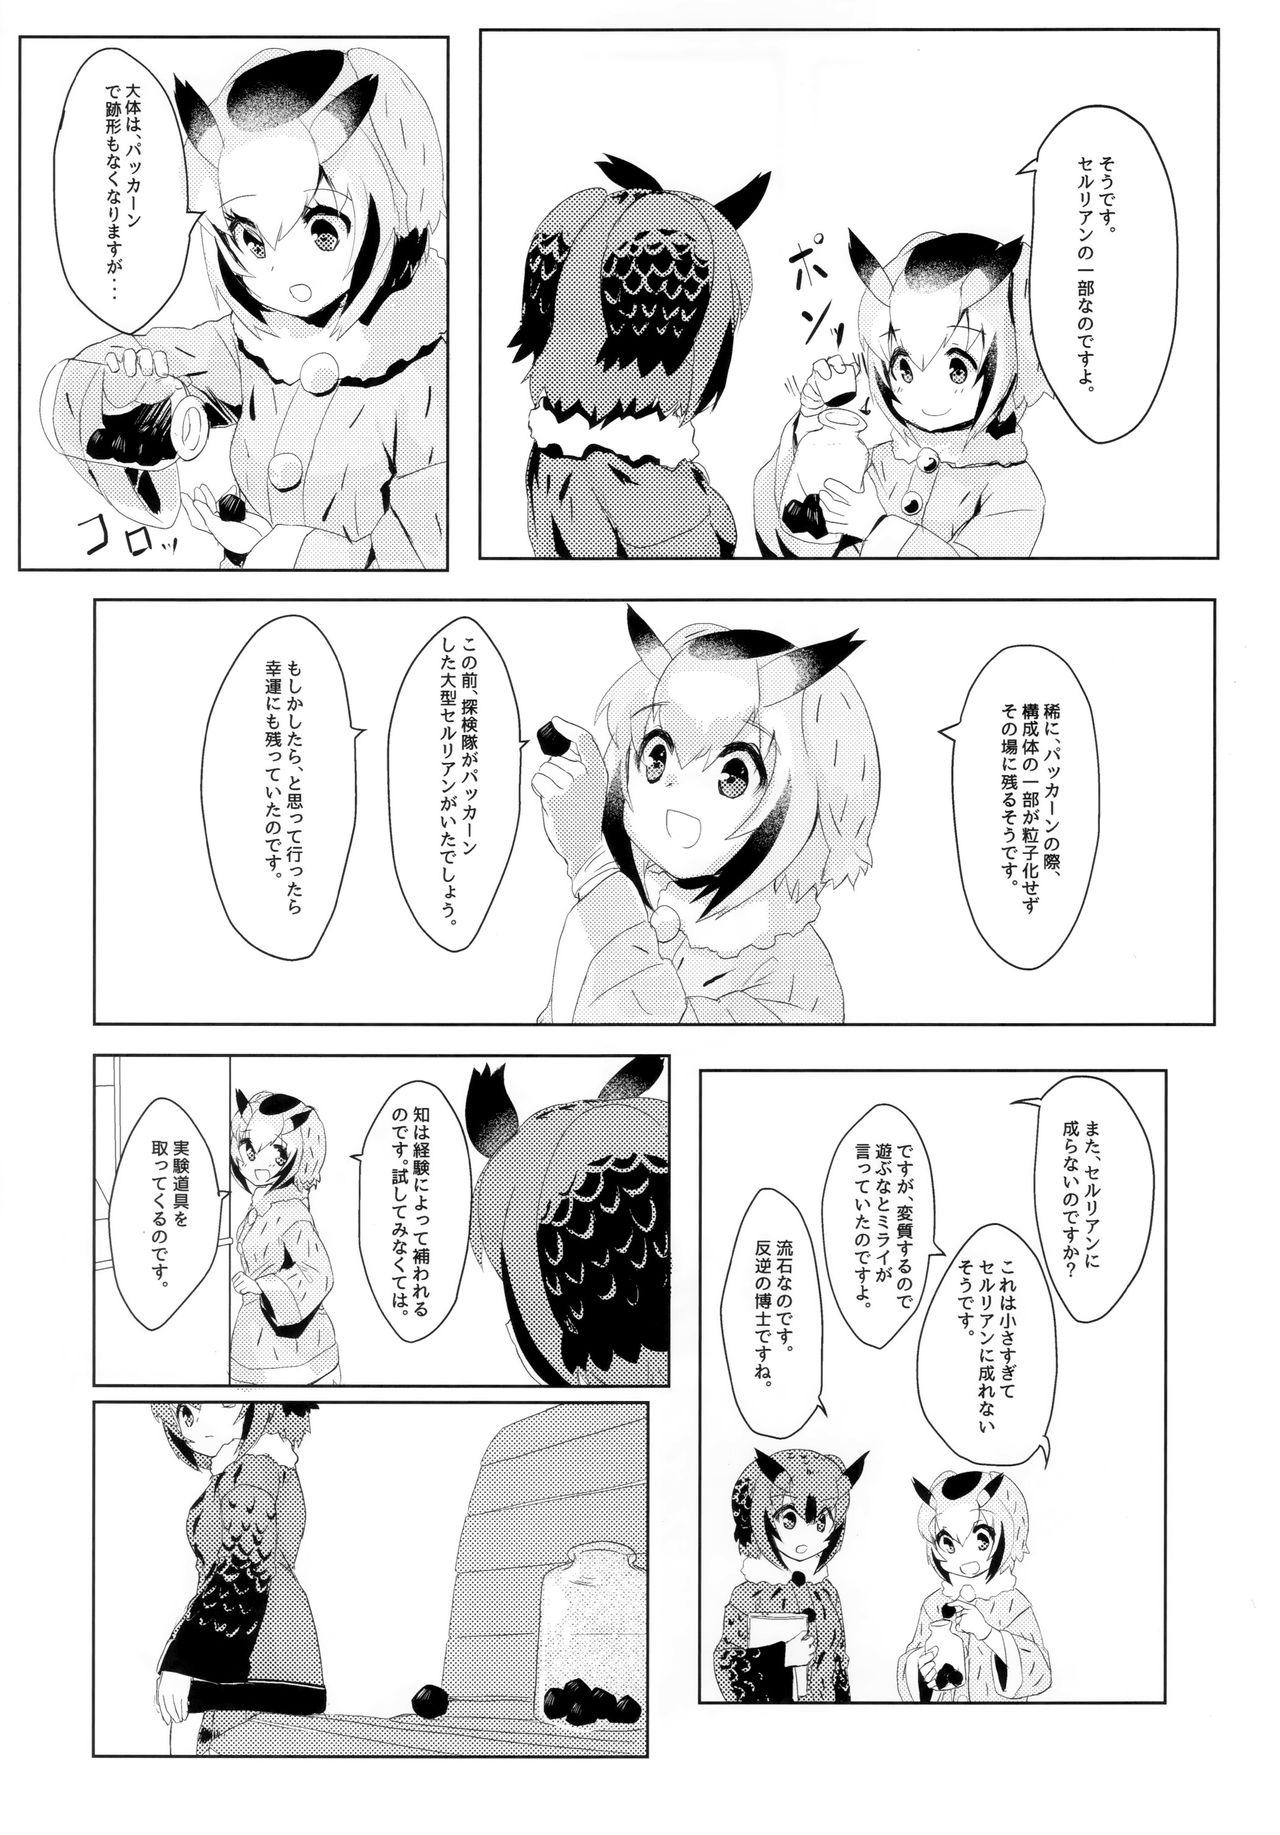 Room CURIOSITY - Kemono friends Adult Toys - Page 5